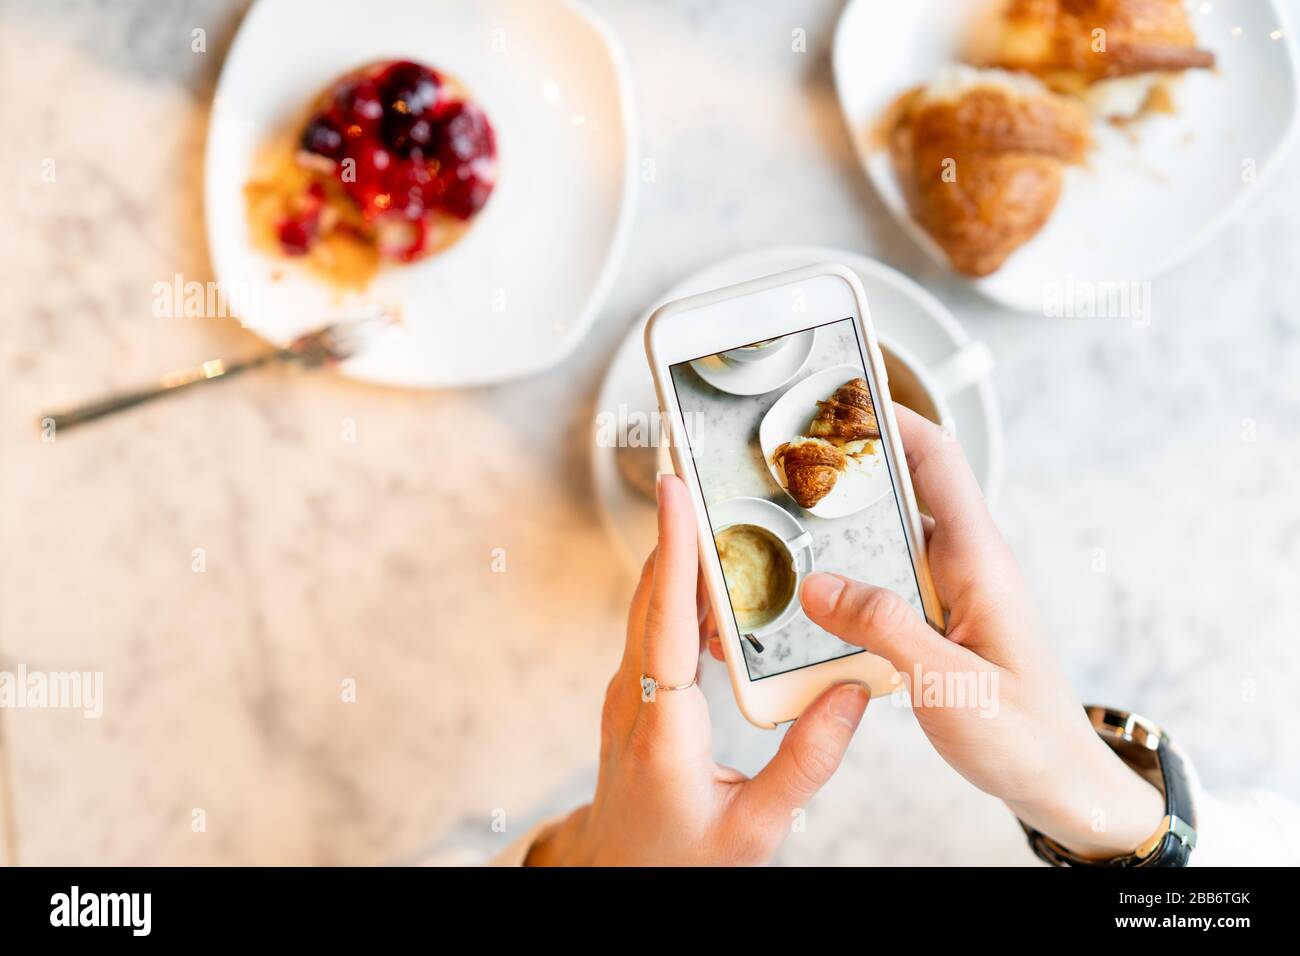 Woman taking photos of her breakfast on her mobile phone Stock Photo